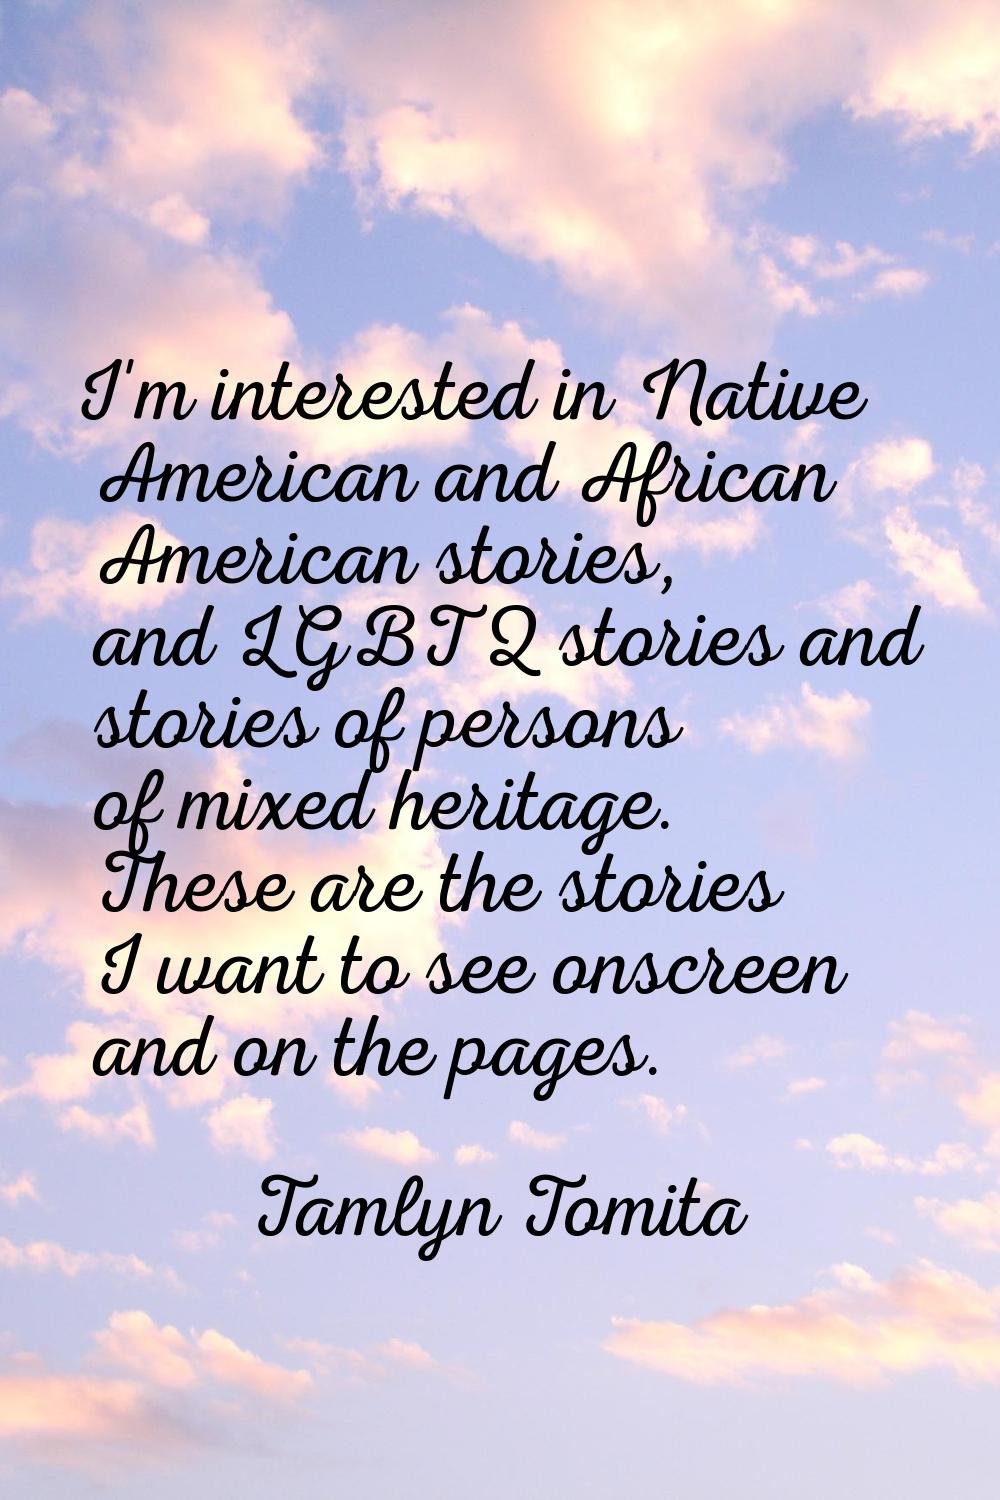 I'm interested in Native American and African American stories, and LGBTQ stories and stories of pe